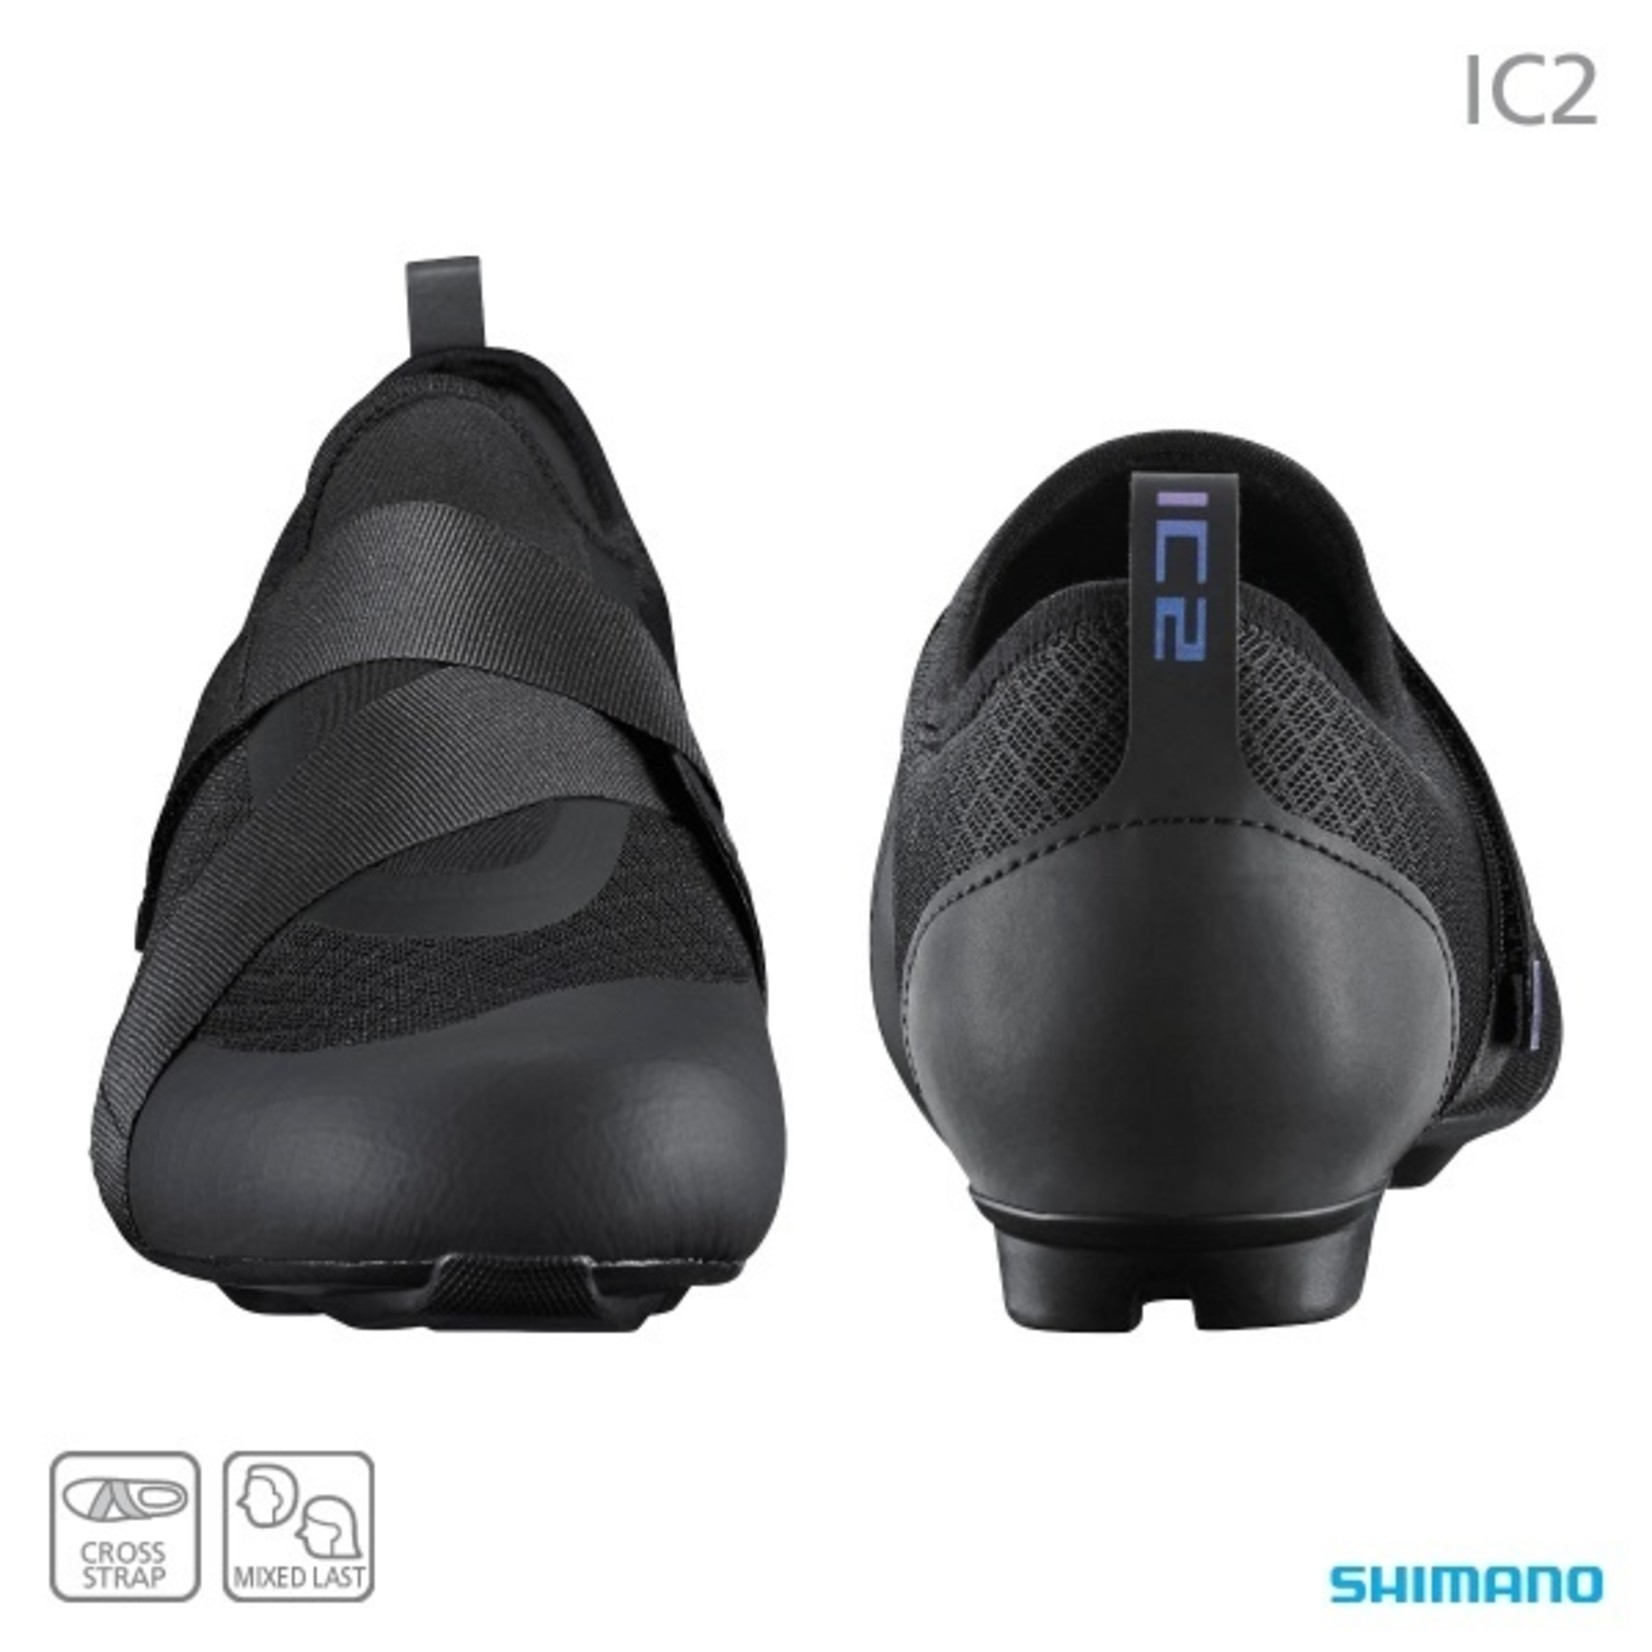 Shimano Shimano SH-IC200 Indoor Cycling Speed Shoes Stable Rubber Sole - Black